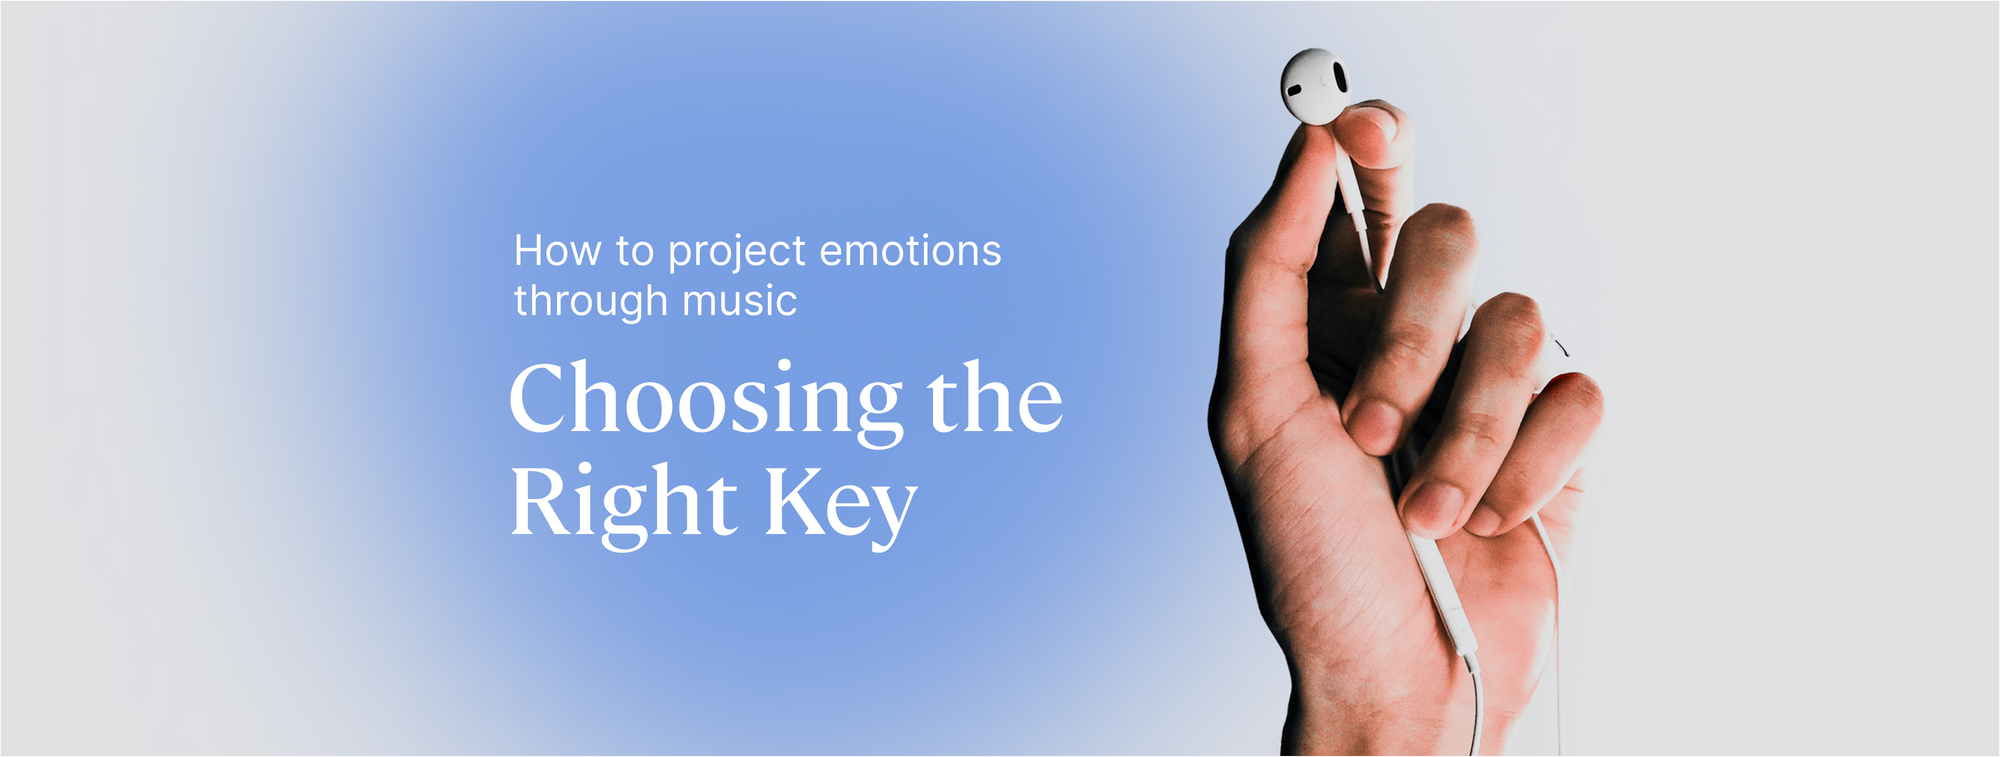 How to project emotions through music: Choosing the right key